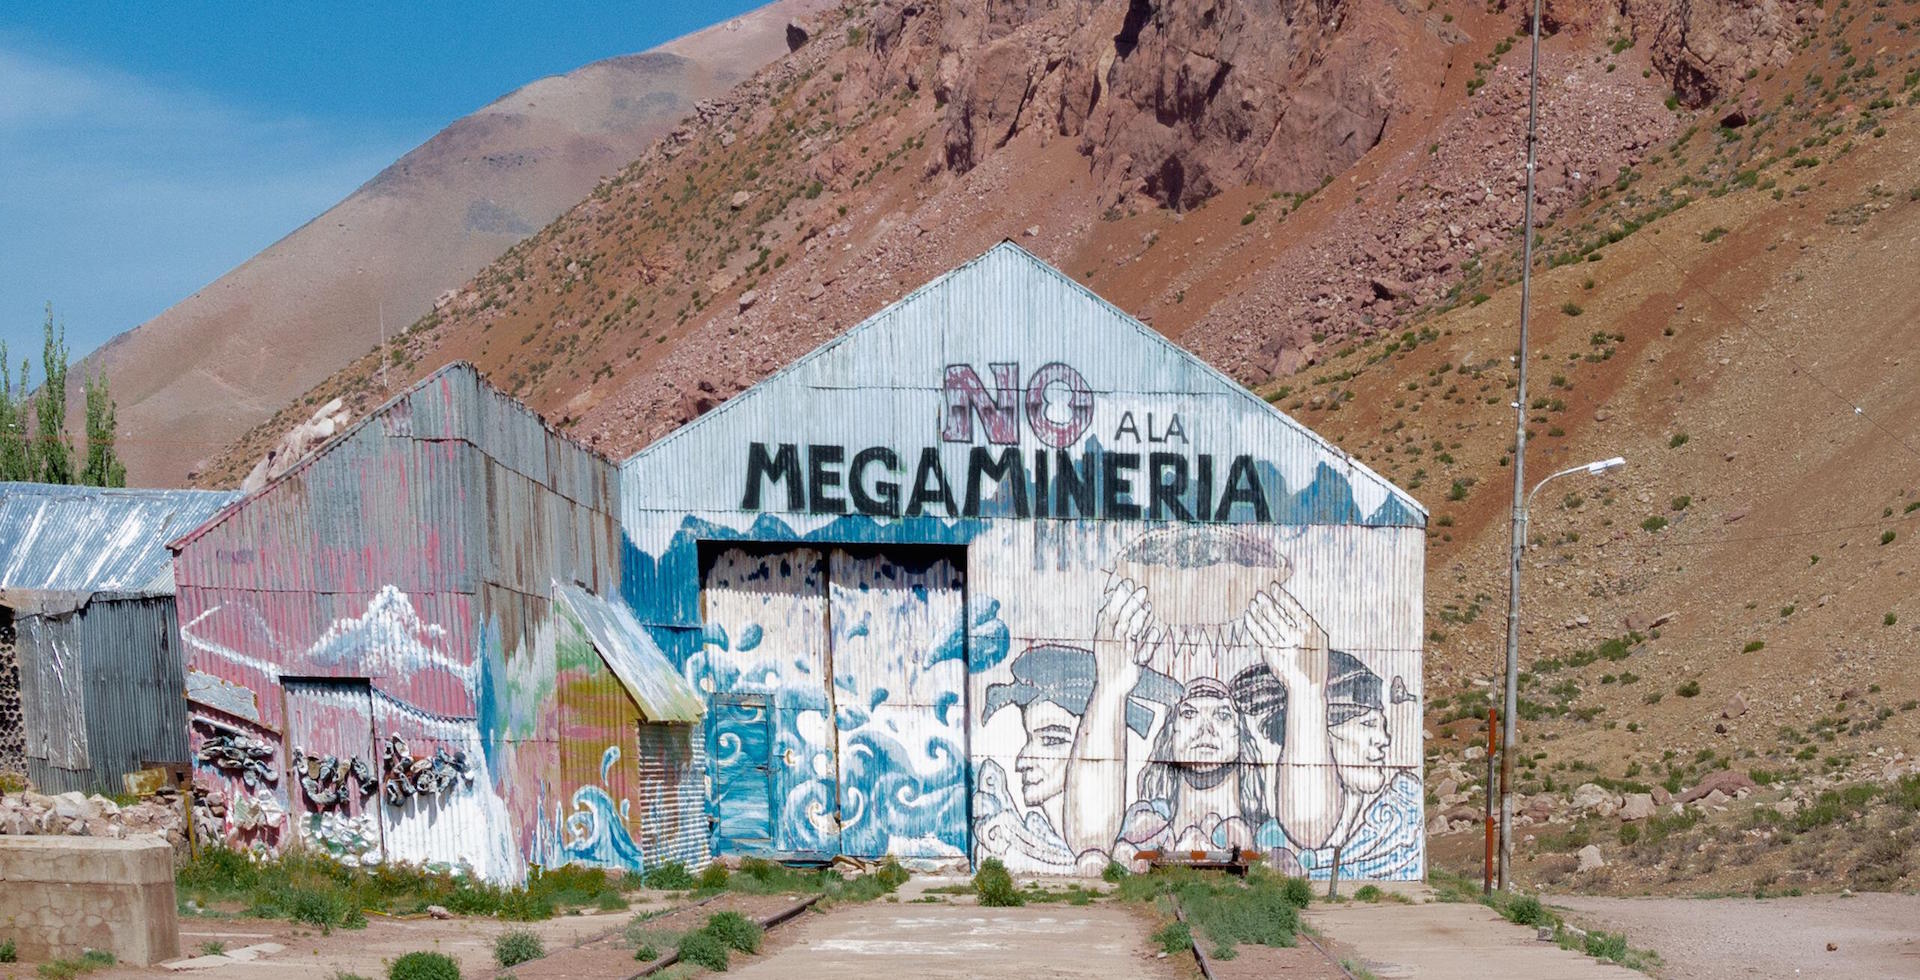 <p>An anti-mining mural in Mendoza, Argentina, where communities pushed back against attempts to reform water laws to enable large-scale extraction (Image: Alamy)</p>